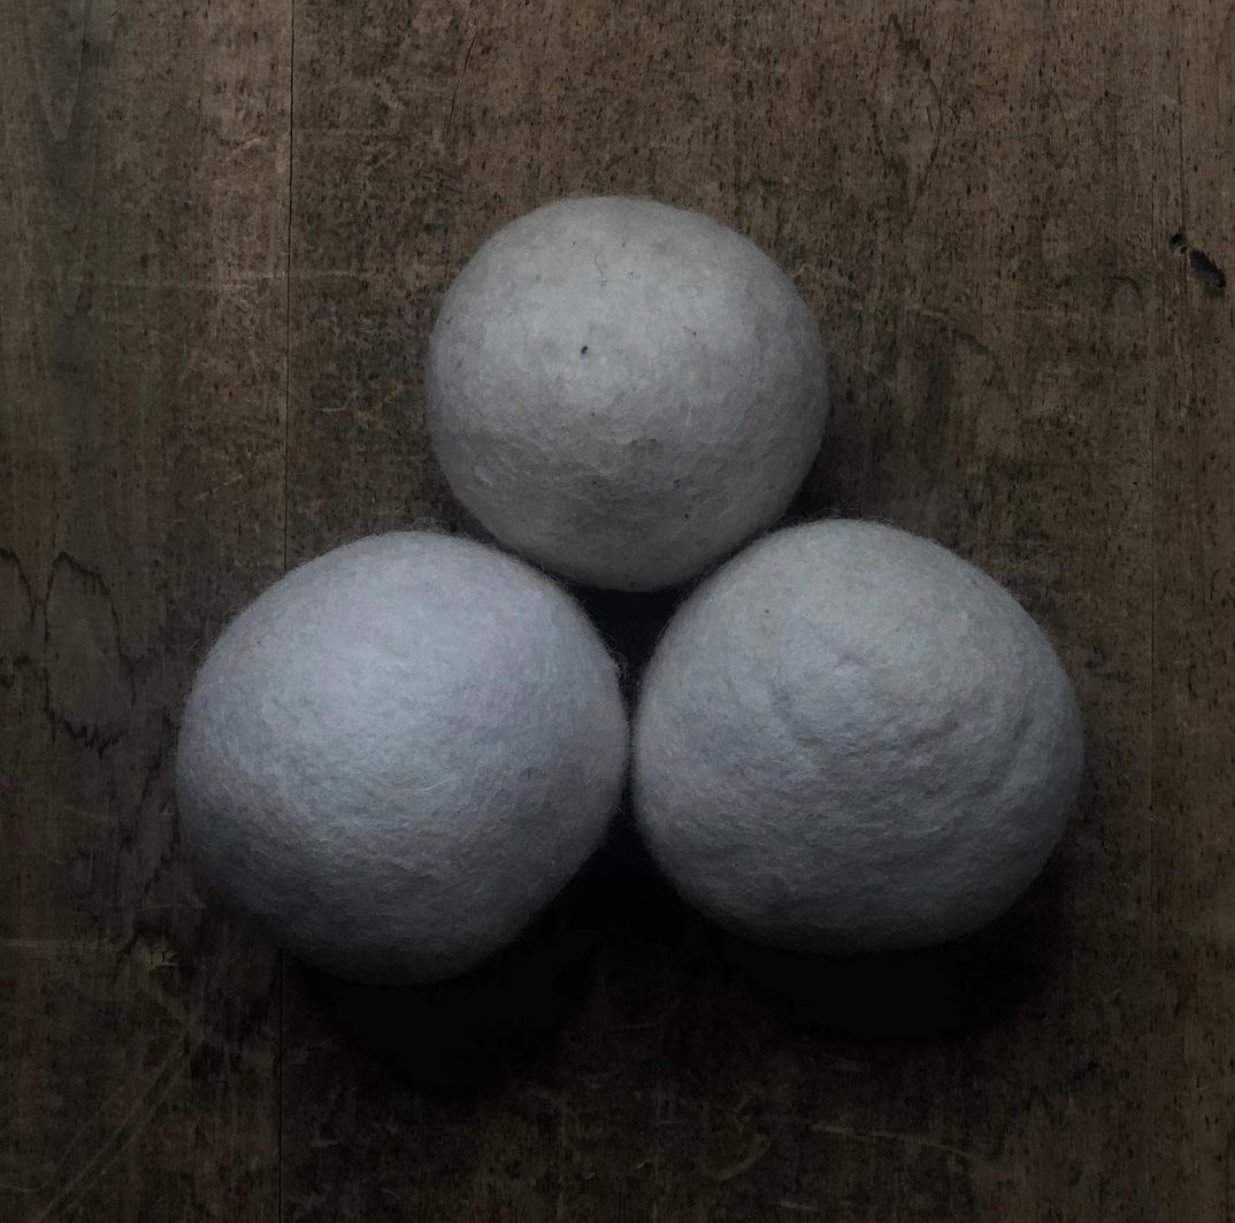 Details about   Wool Dryer Balls EXTRA XL Large Big Wool Dryer Balls 3 pack Wool Dryer Balls 